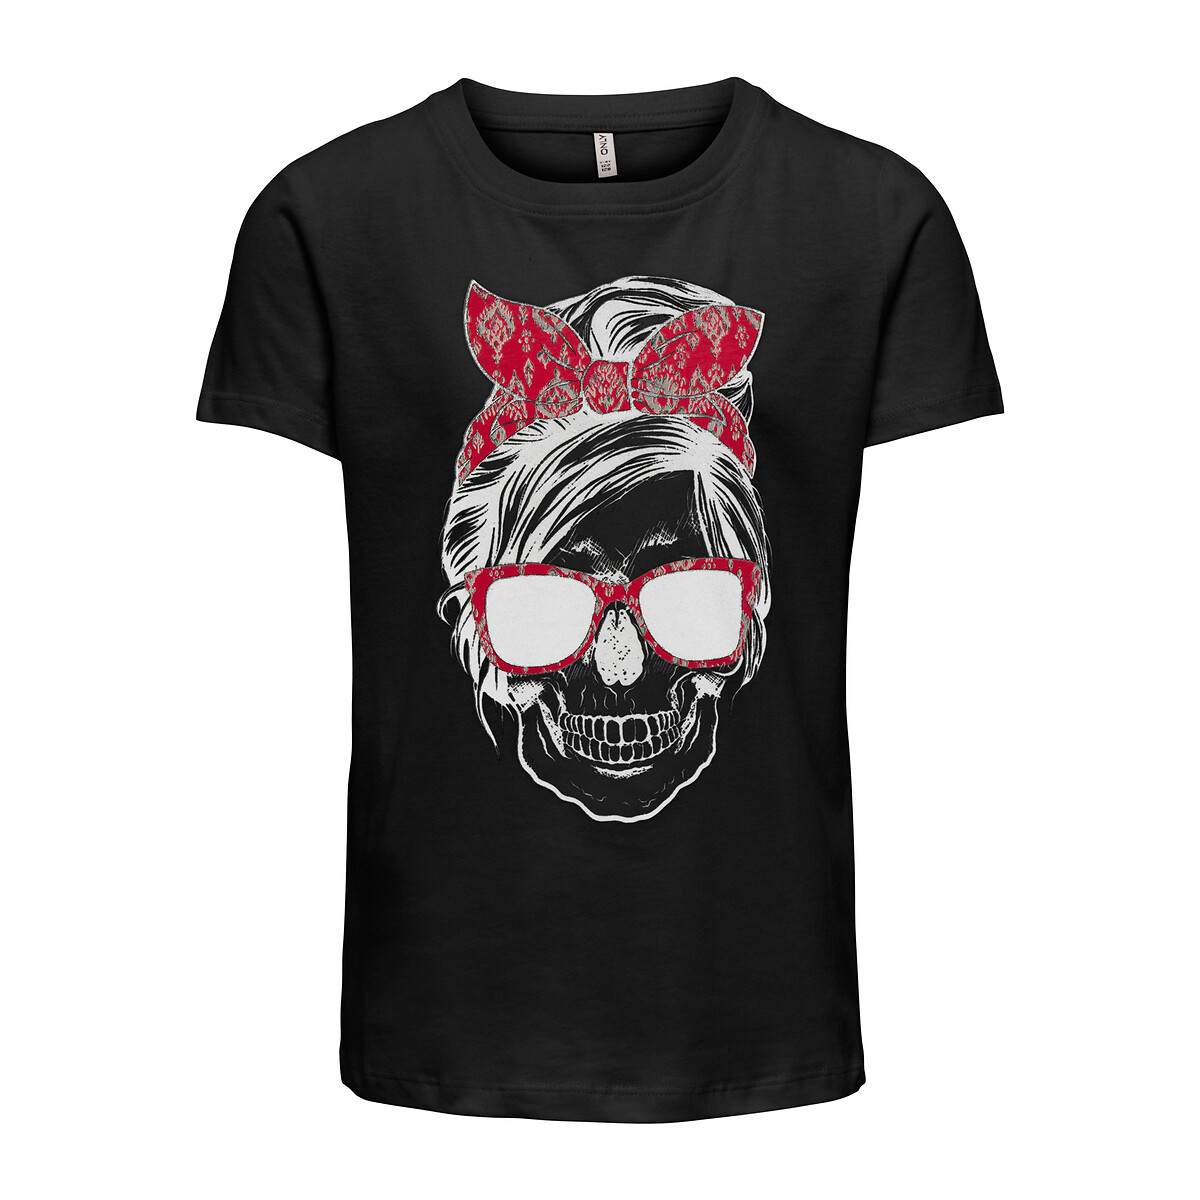 Skull Print Cotton T-Shirt with Short Sleeves